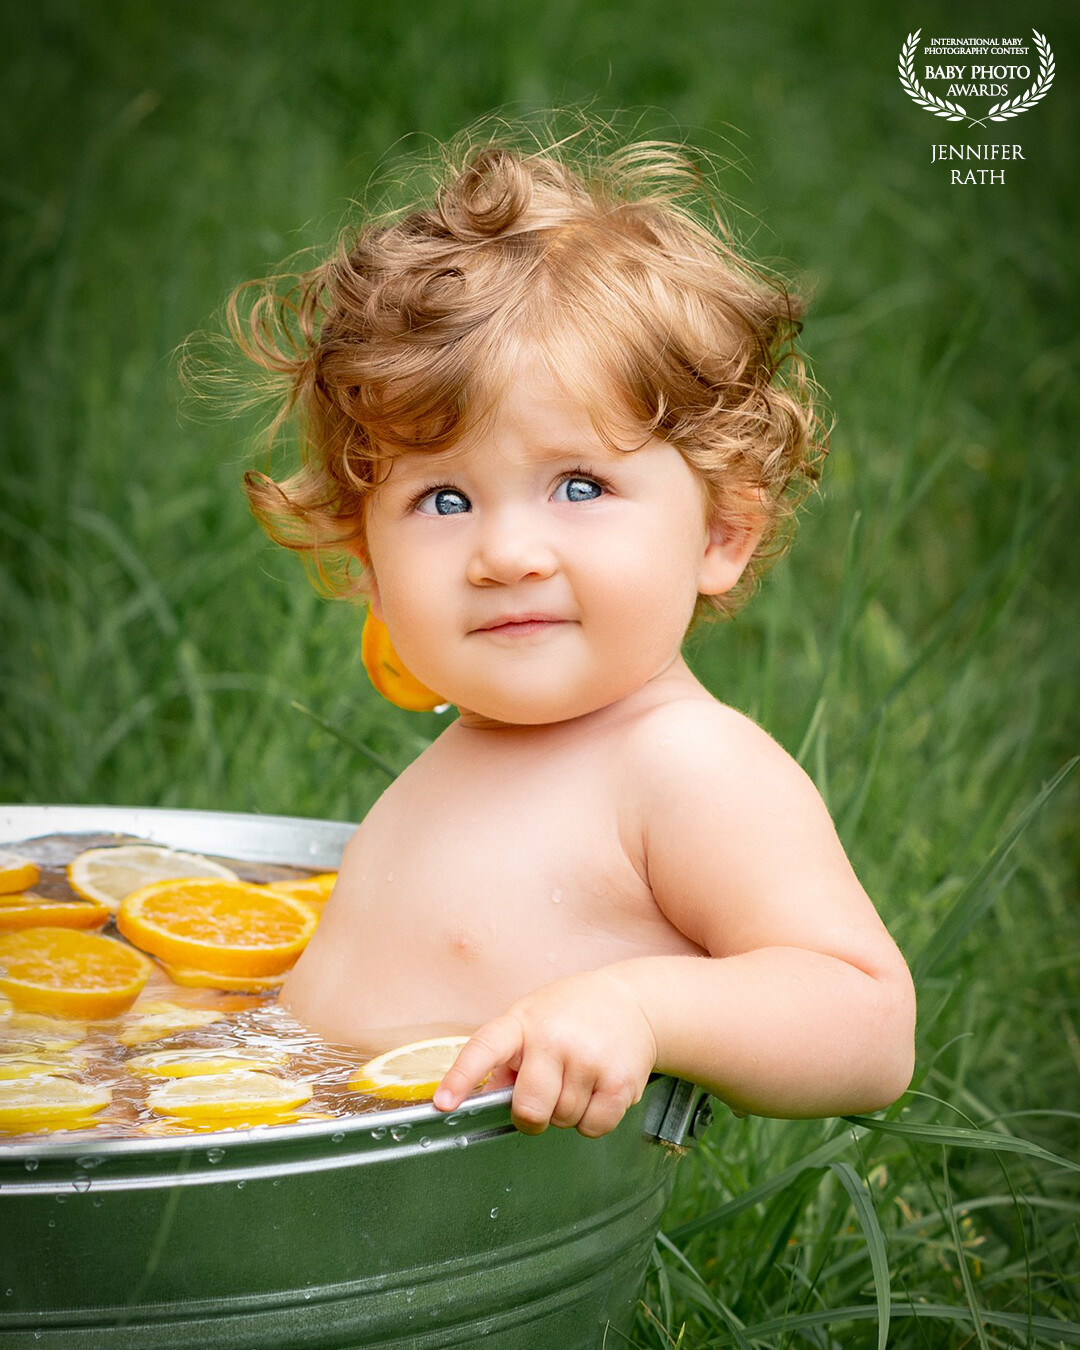 Fruit bath shooting with this little girl.